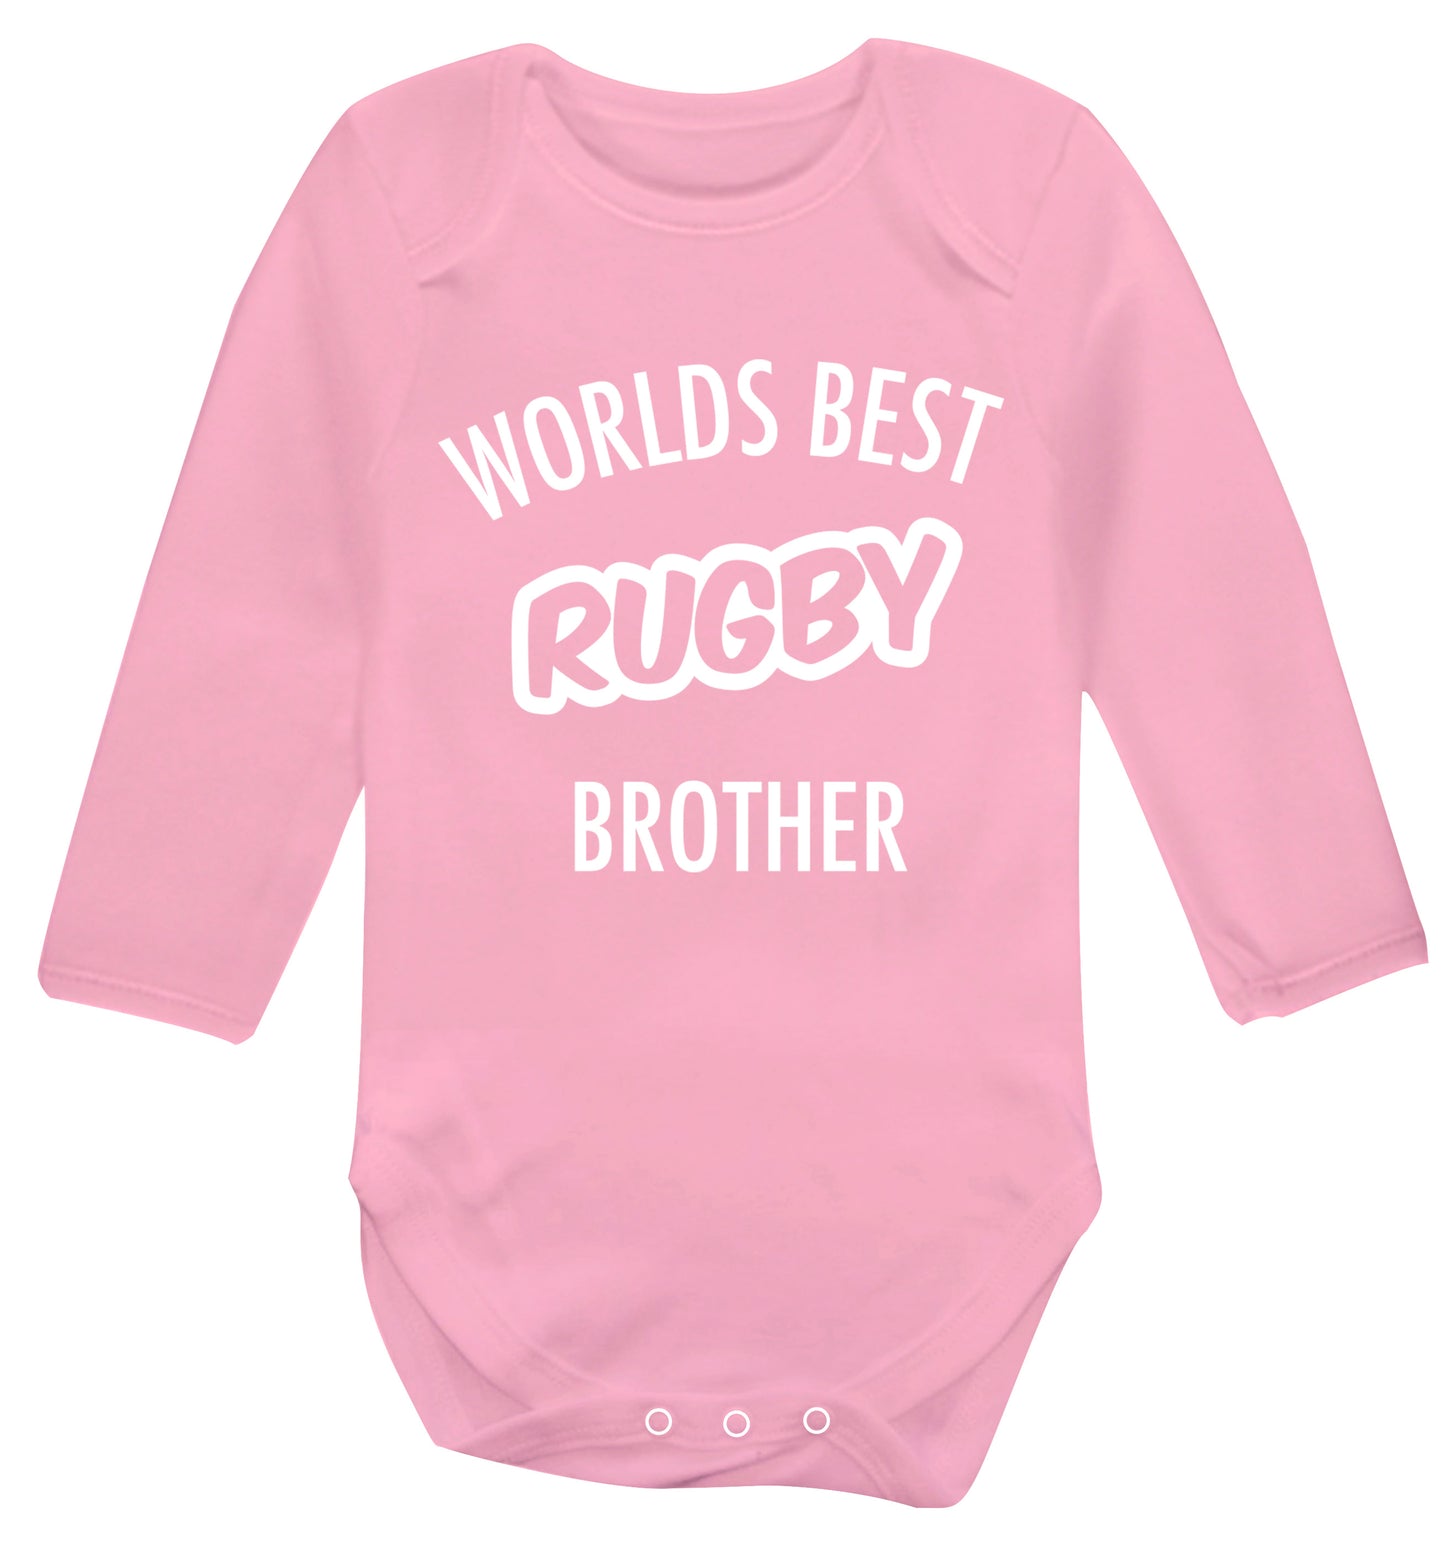 Worlds best rugby brother Baby Vest long sleeved pale pink 6-12 months